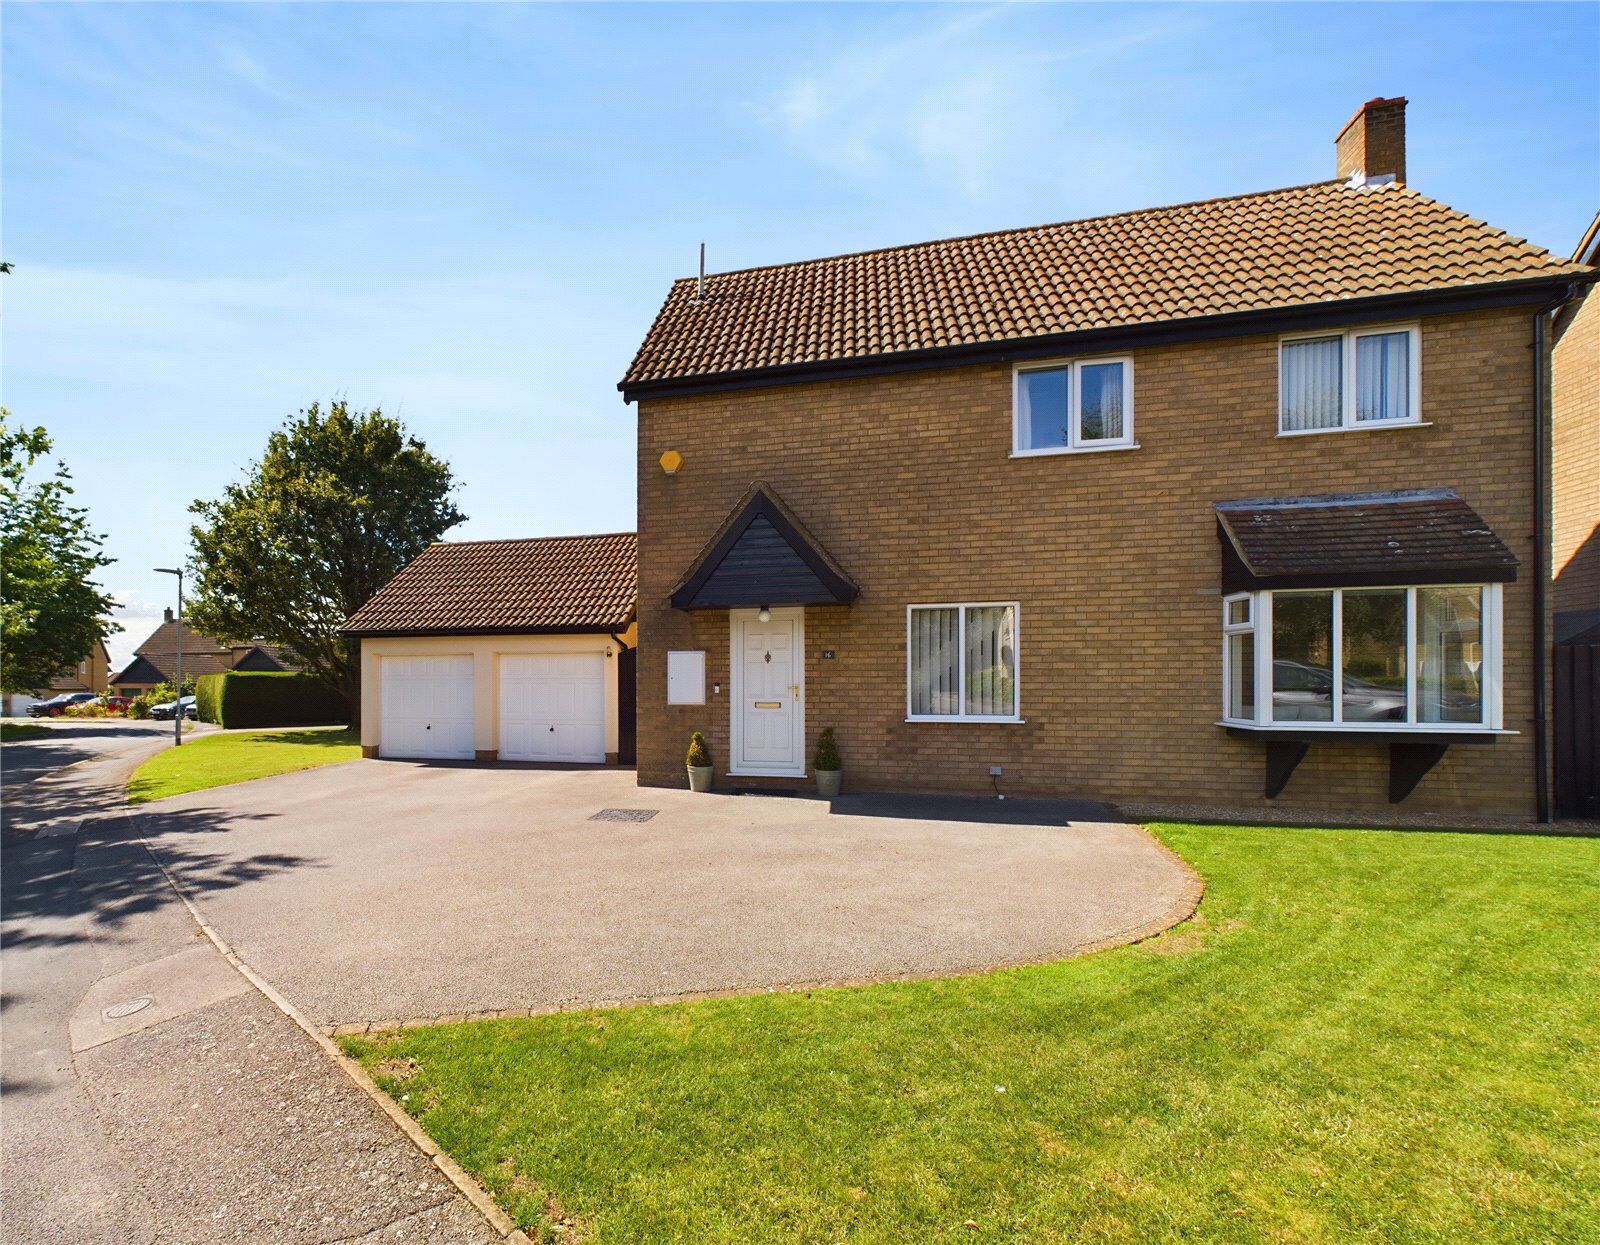 4 bedroom detached house for sale Winchfield, Great Gransden, SG19, main image